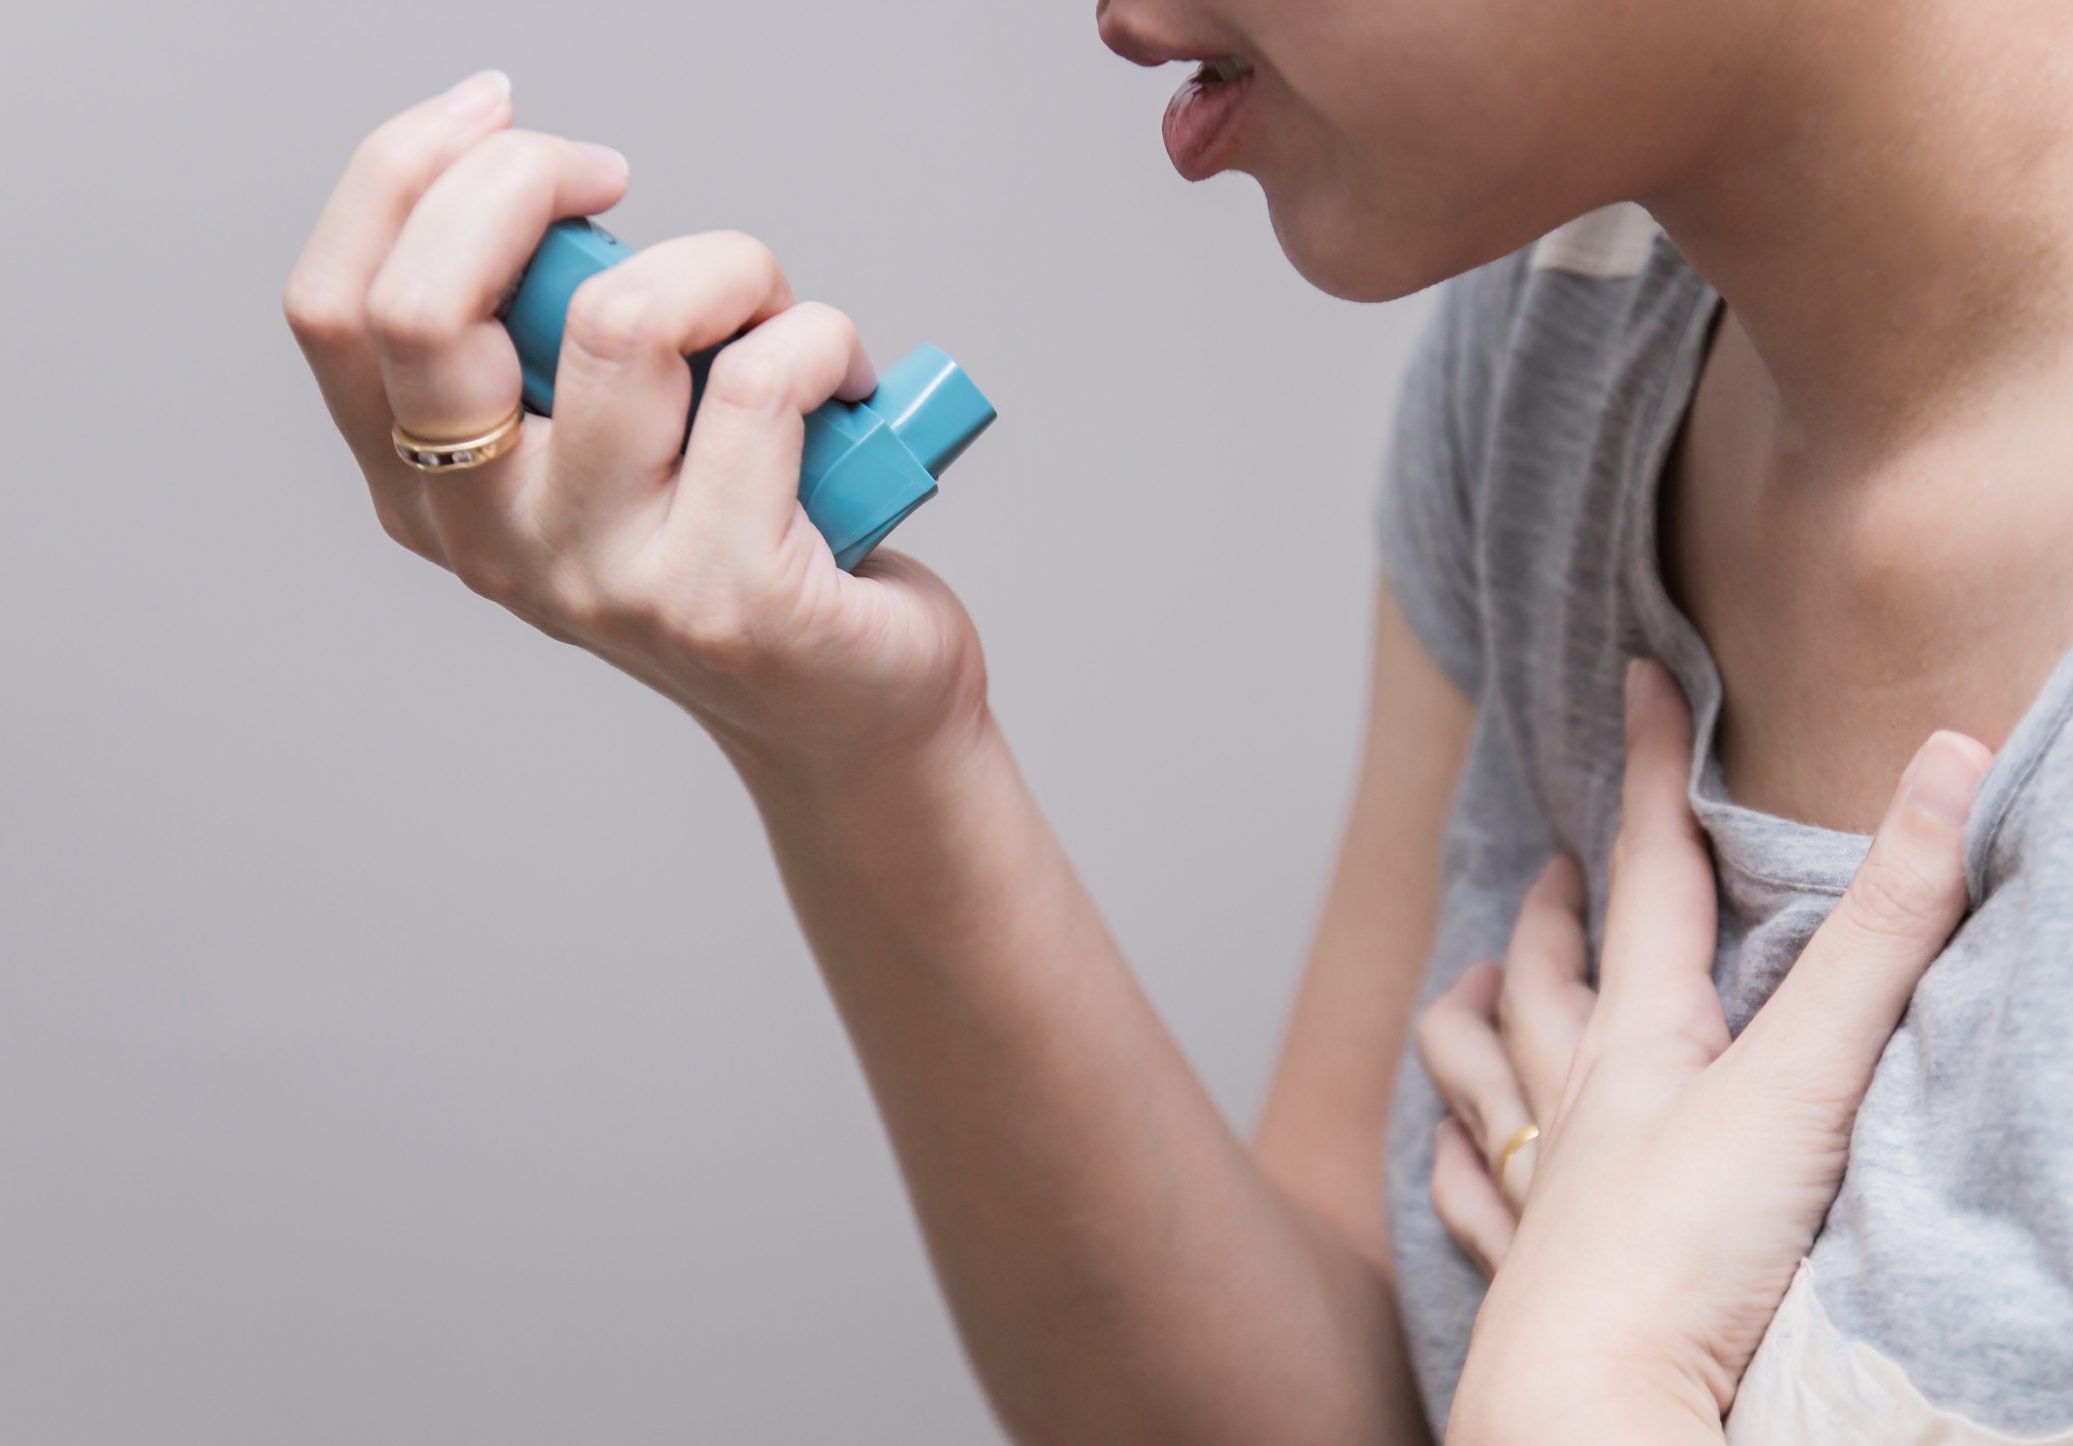 7 Silent Signs You Could Have COPD and Not Know It